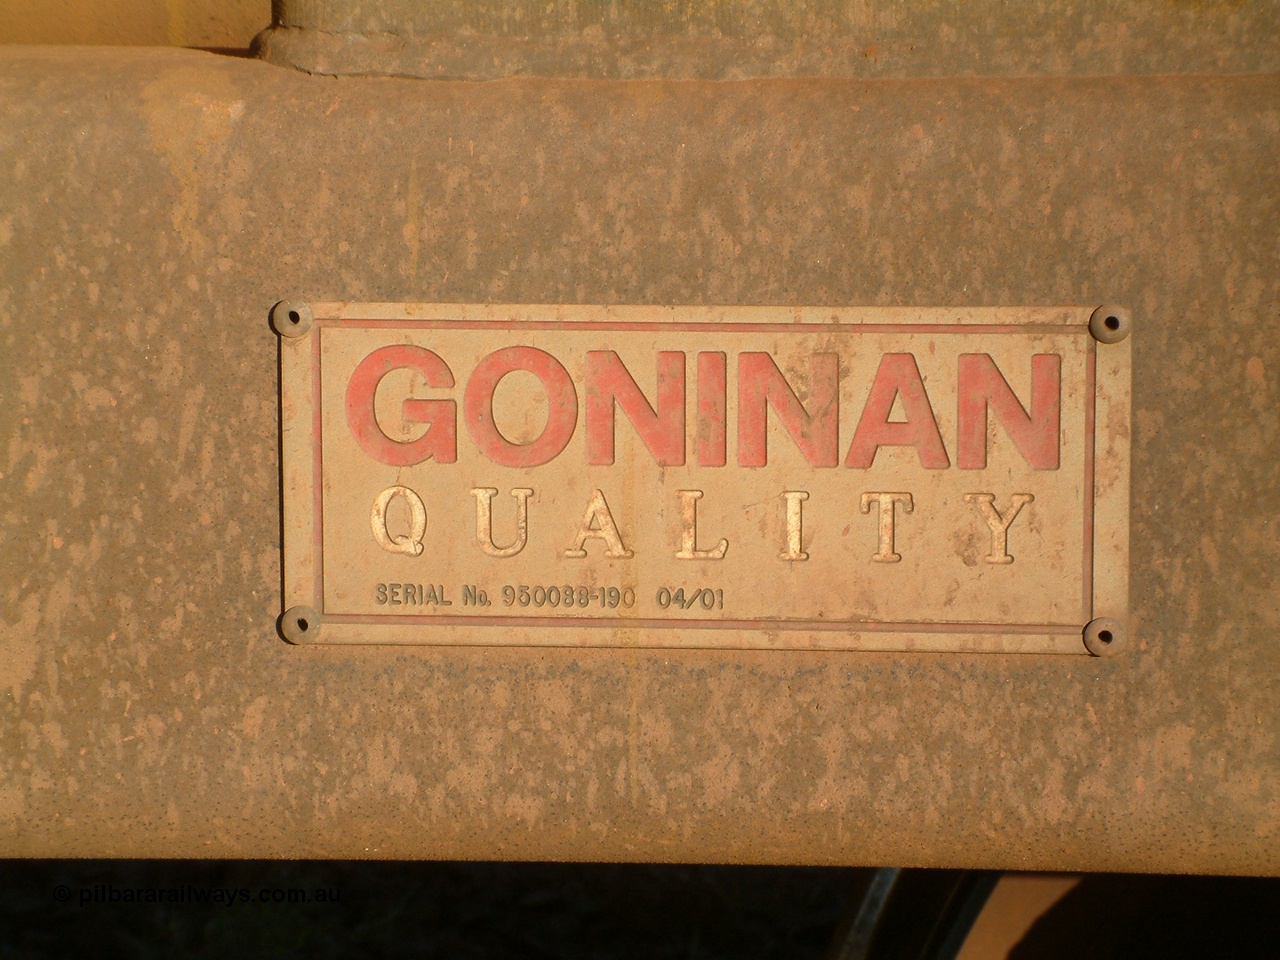 040815 165508
Nelson Point Car Dumper 3, builders plate of Goninan built replacement ore waggon 2063, one of a batch of 345 waggons built to the new Lynx Engineering design known as the Golynx waggons serial 950088-190 and build date 04/2001. 15th August 2004.
Keywords: 2063;Goninan-WA;Golynx;BHP-ore-waggon;